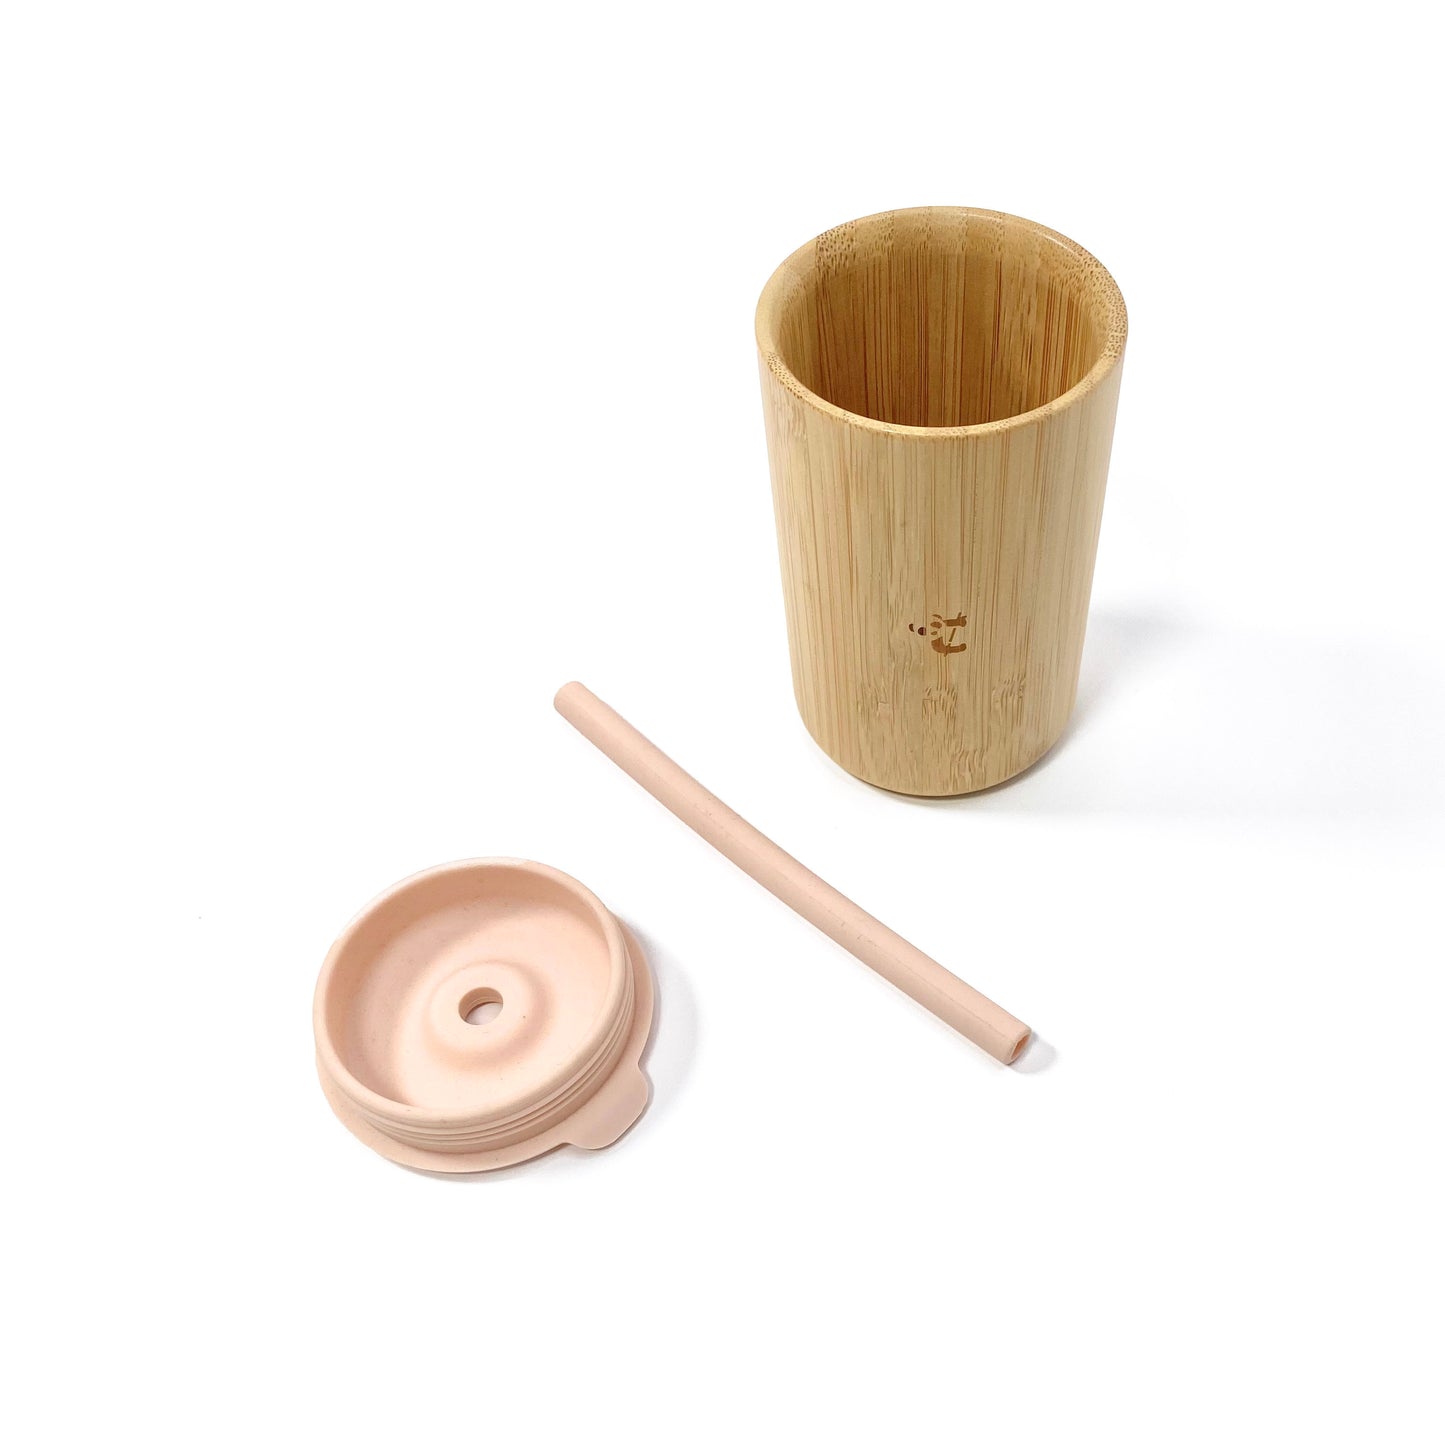 A children’s bamboo drinking cup, with a peachy pink silicone lid and matching straw. View shows the cup, lid and straw separately.